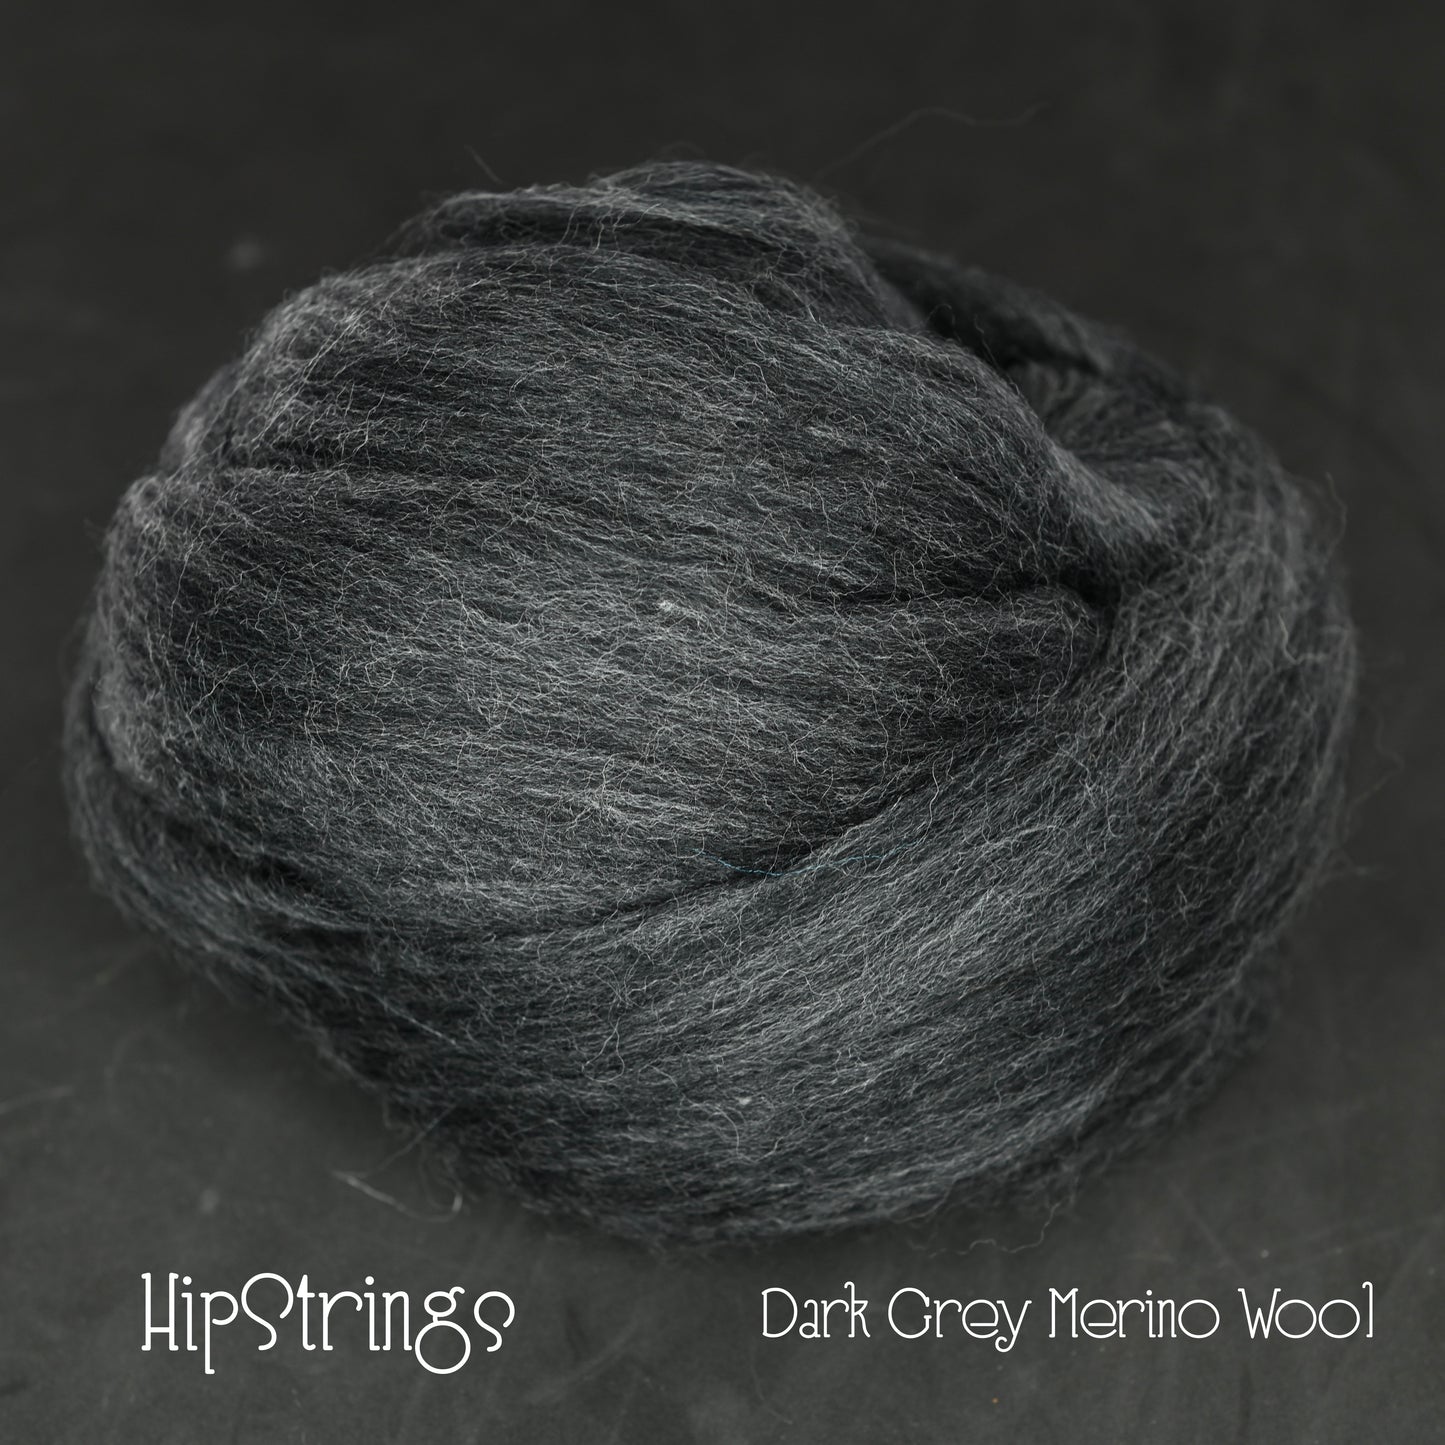 Shades of Merino Combed Wool Top 4 oz